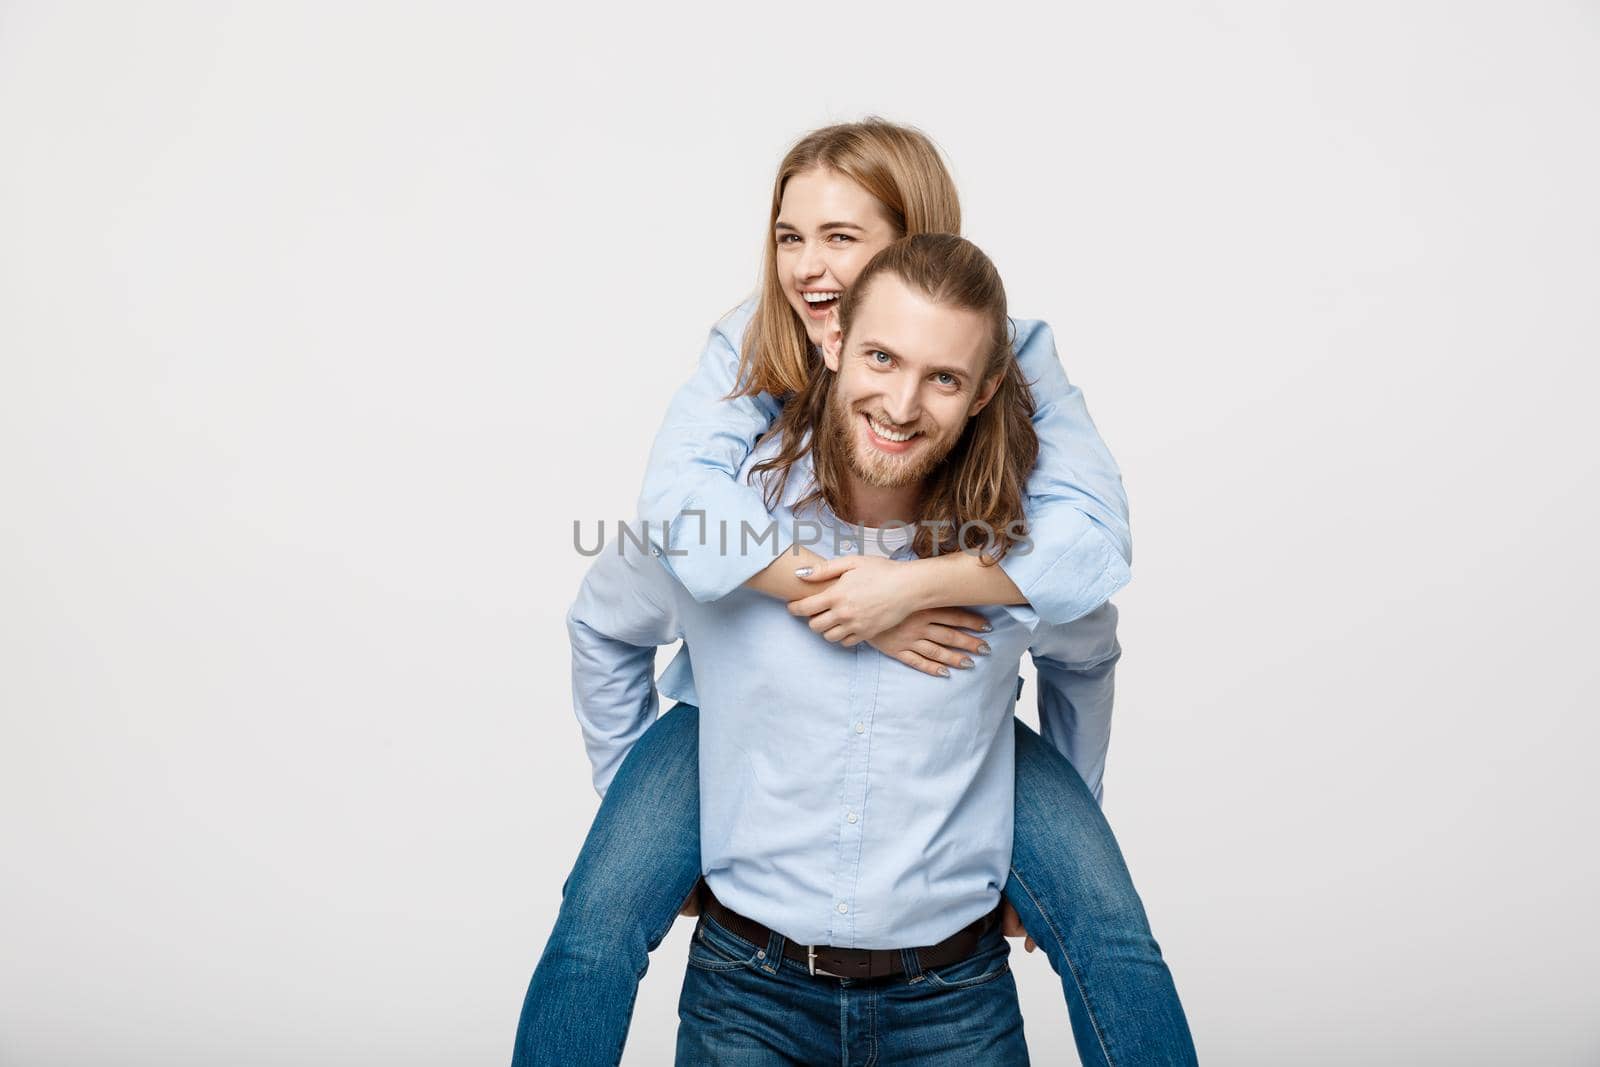 Portrait of smiling man giving happy woman a piggyback ride